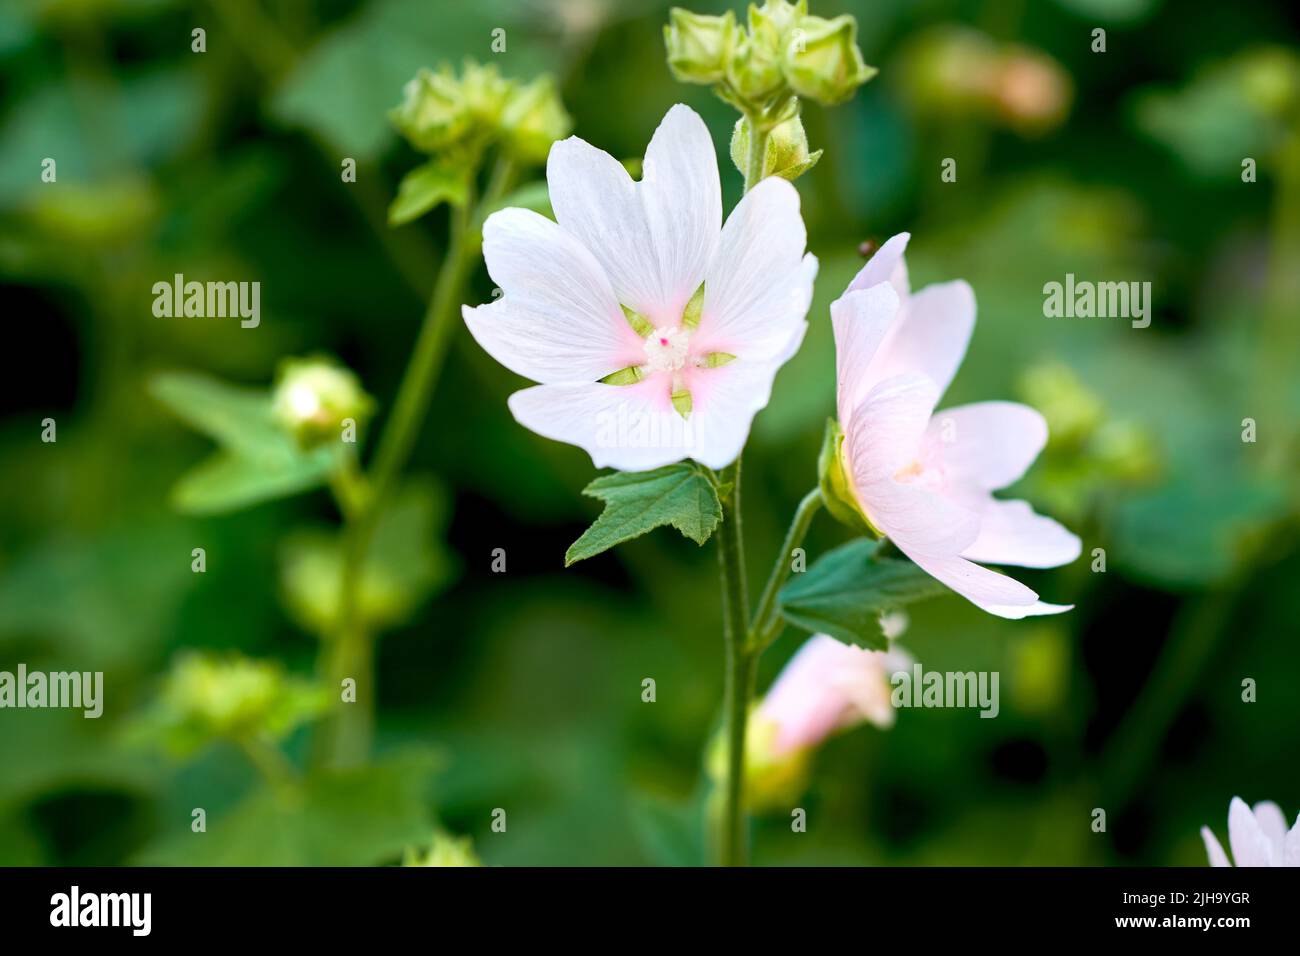 White angel or wrightia antidysenterica flowers growing in a green backyard or garden against a nature background. Beautiful flowering plants Stock Photo